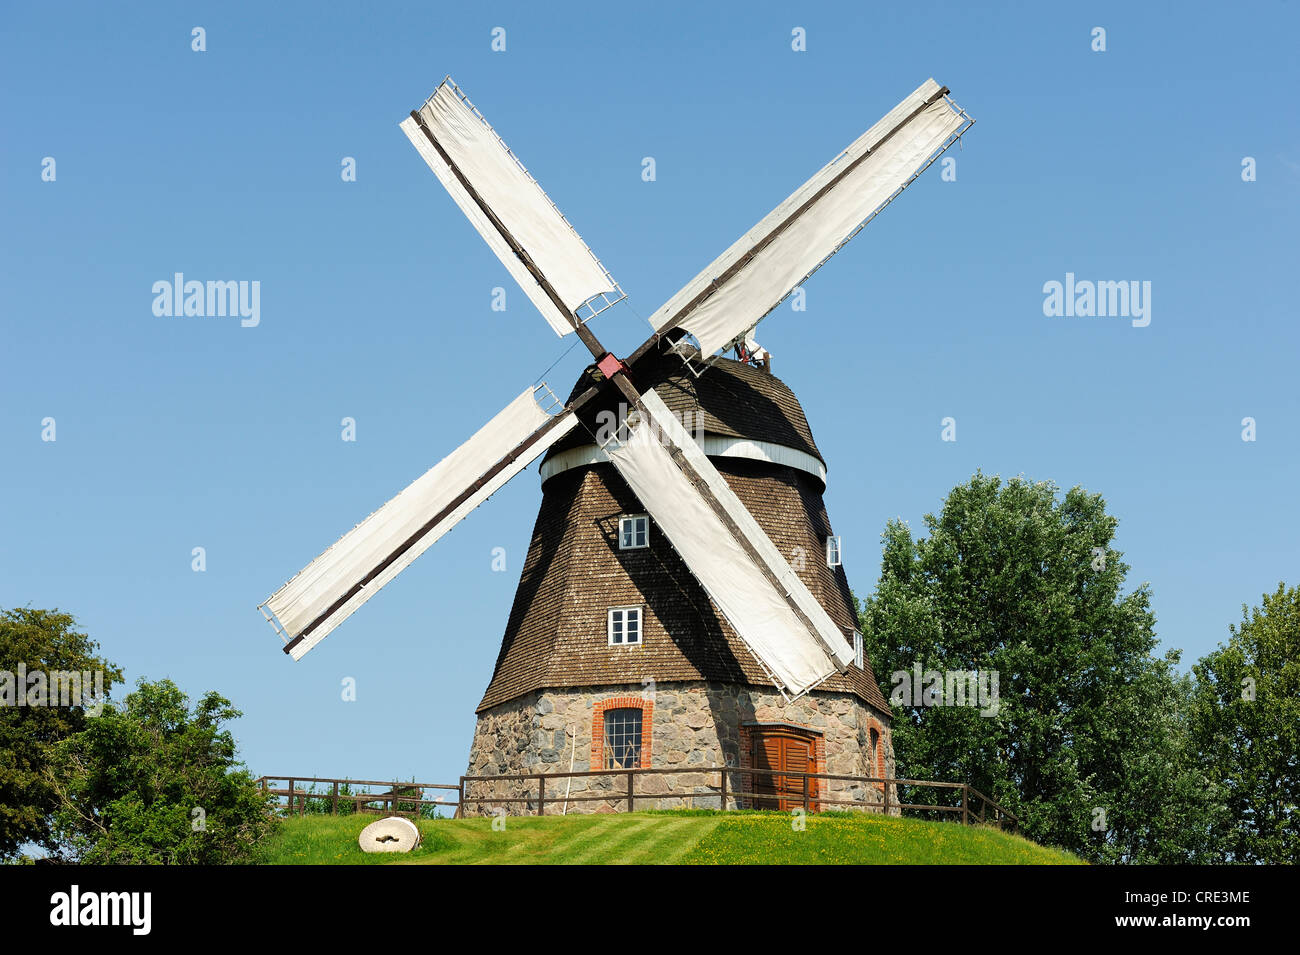 Windmill in the town of Woldegk, Mecklenburg-Western Pomerania, Germany, Europe Stock Photo